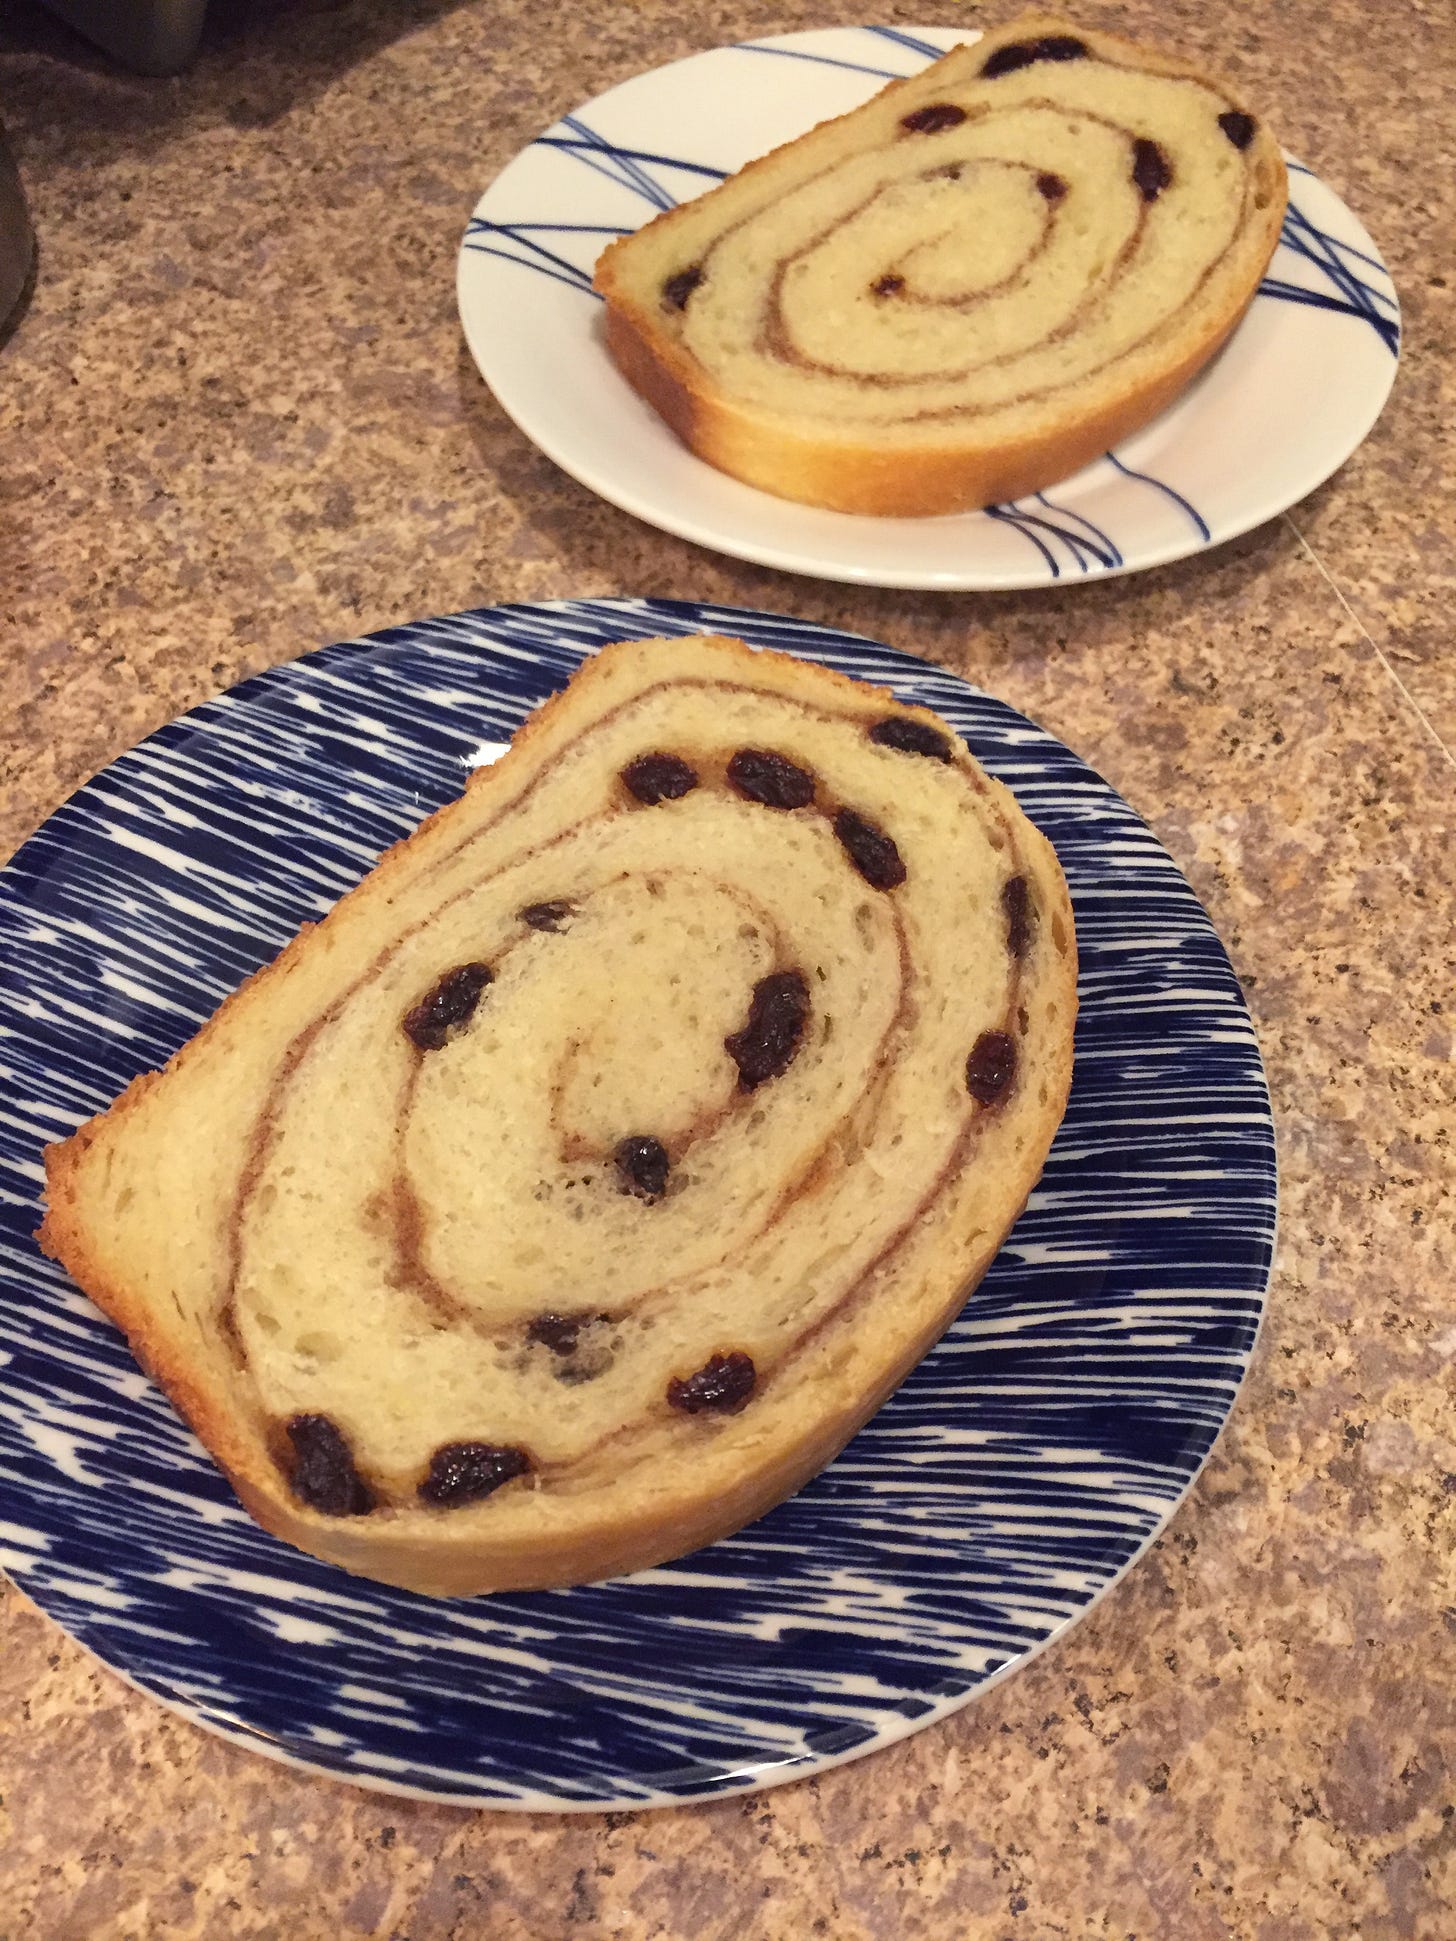 on blue and white plates, two slices of cinnamon-raisin bread. The swirl pattern of the filling is dotted with raisins, and the bread is airy and light.